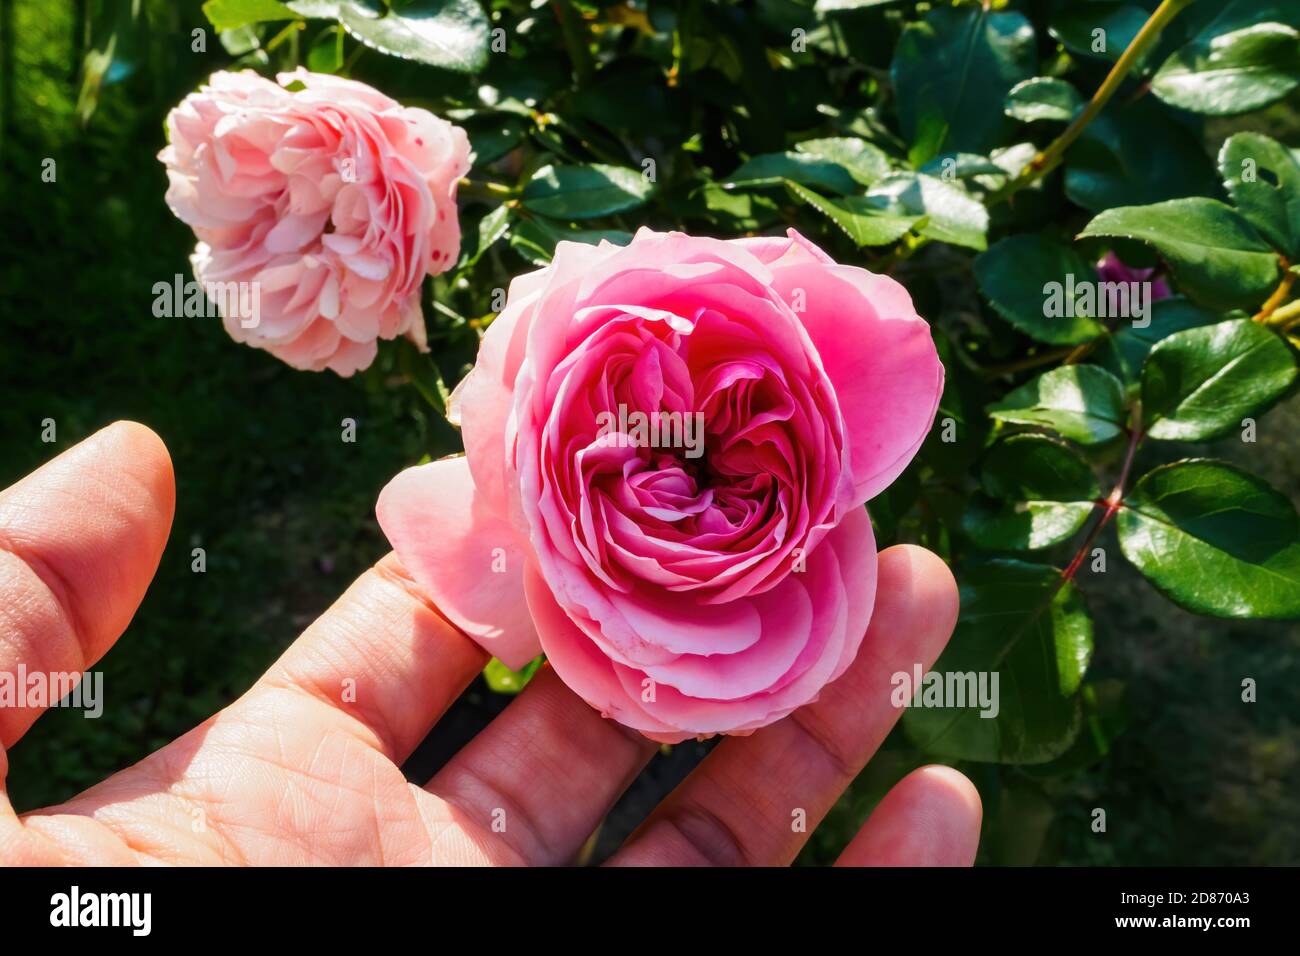 Bud pink rose in hands, top view Stock Photo